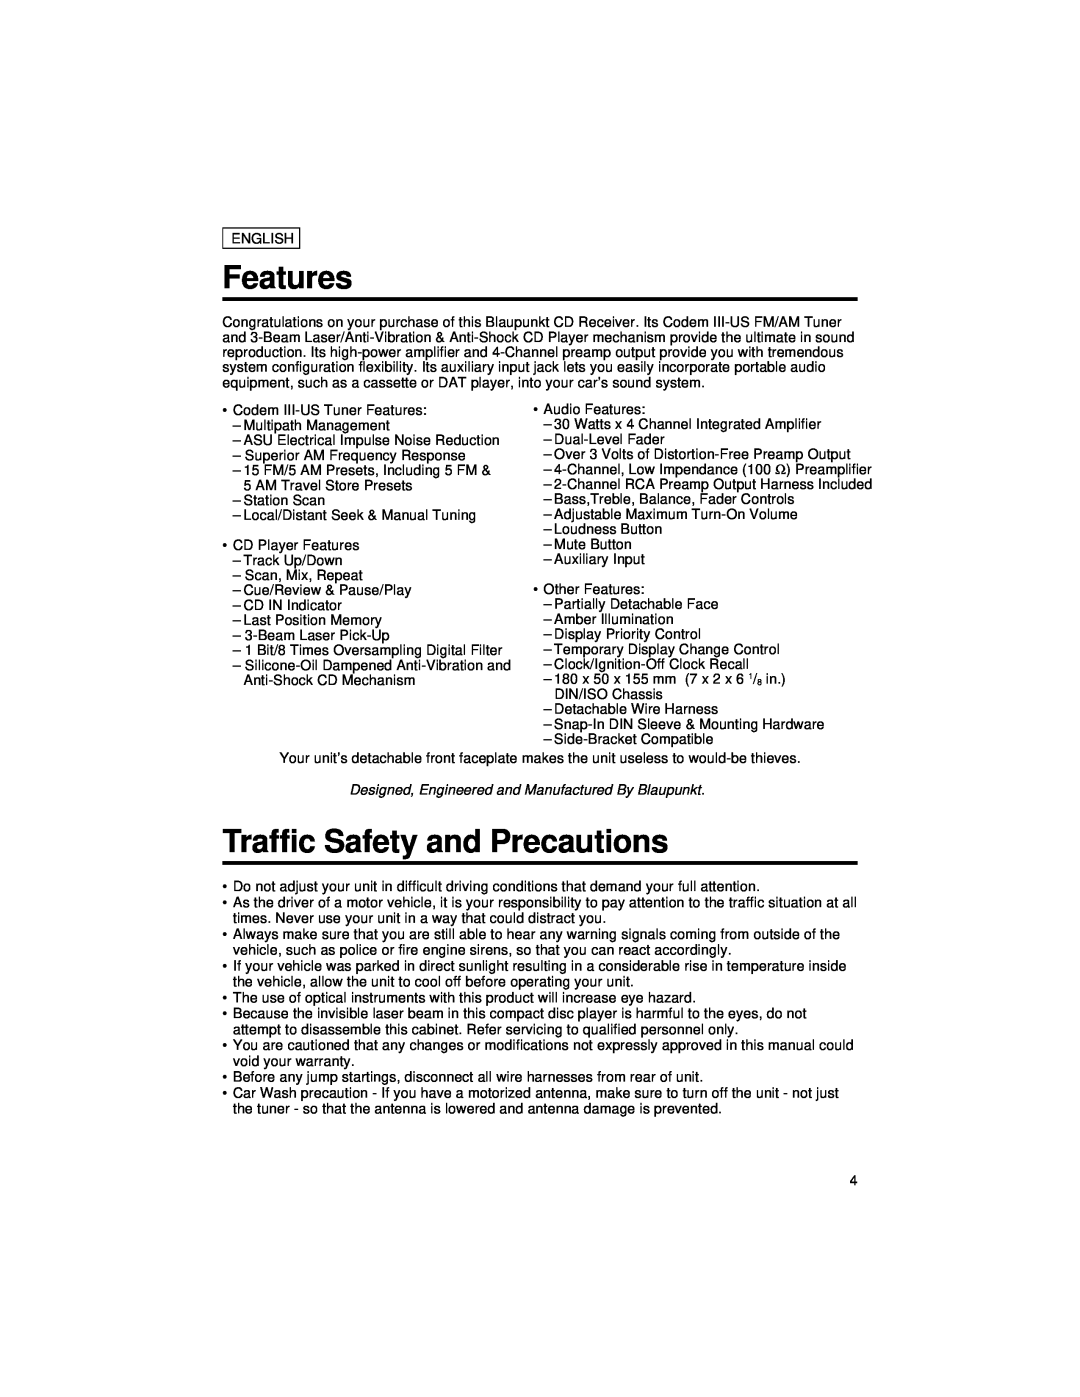 Blaupunkt CD127 manual Features, Traffic Safety and Precautions 